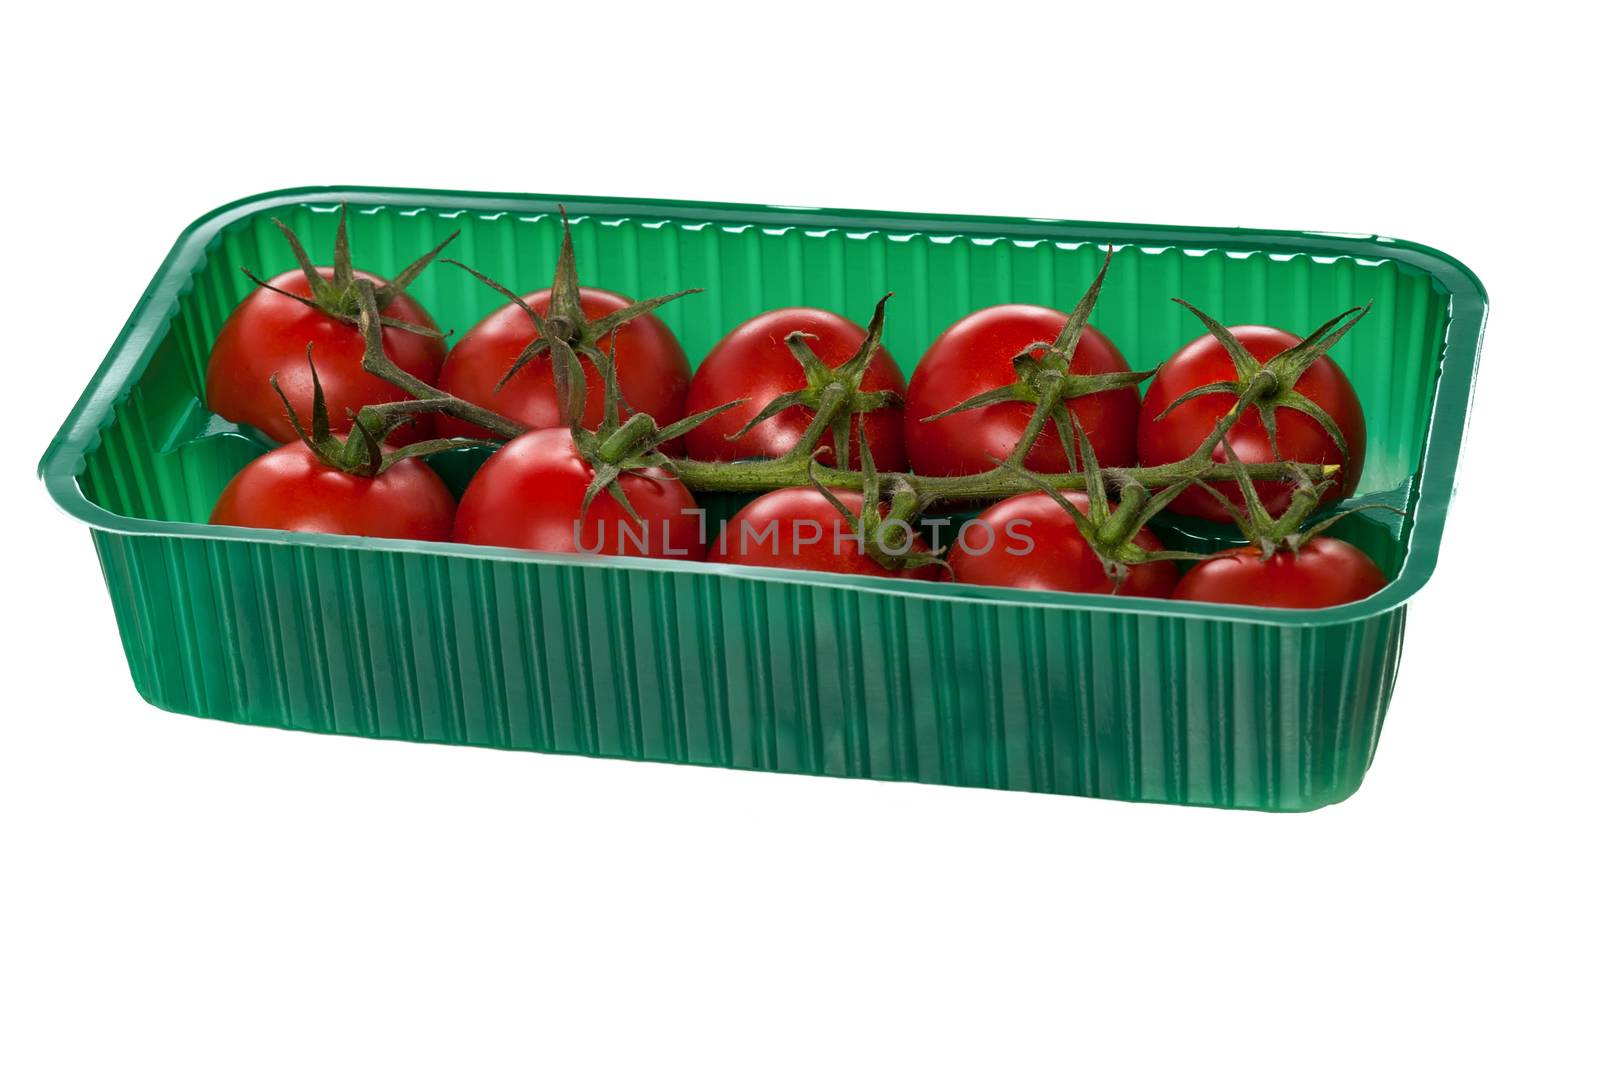 Cherry tomatoes in retail packaging against white